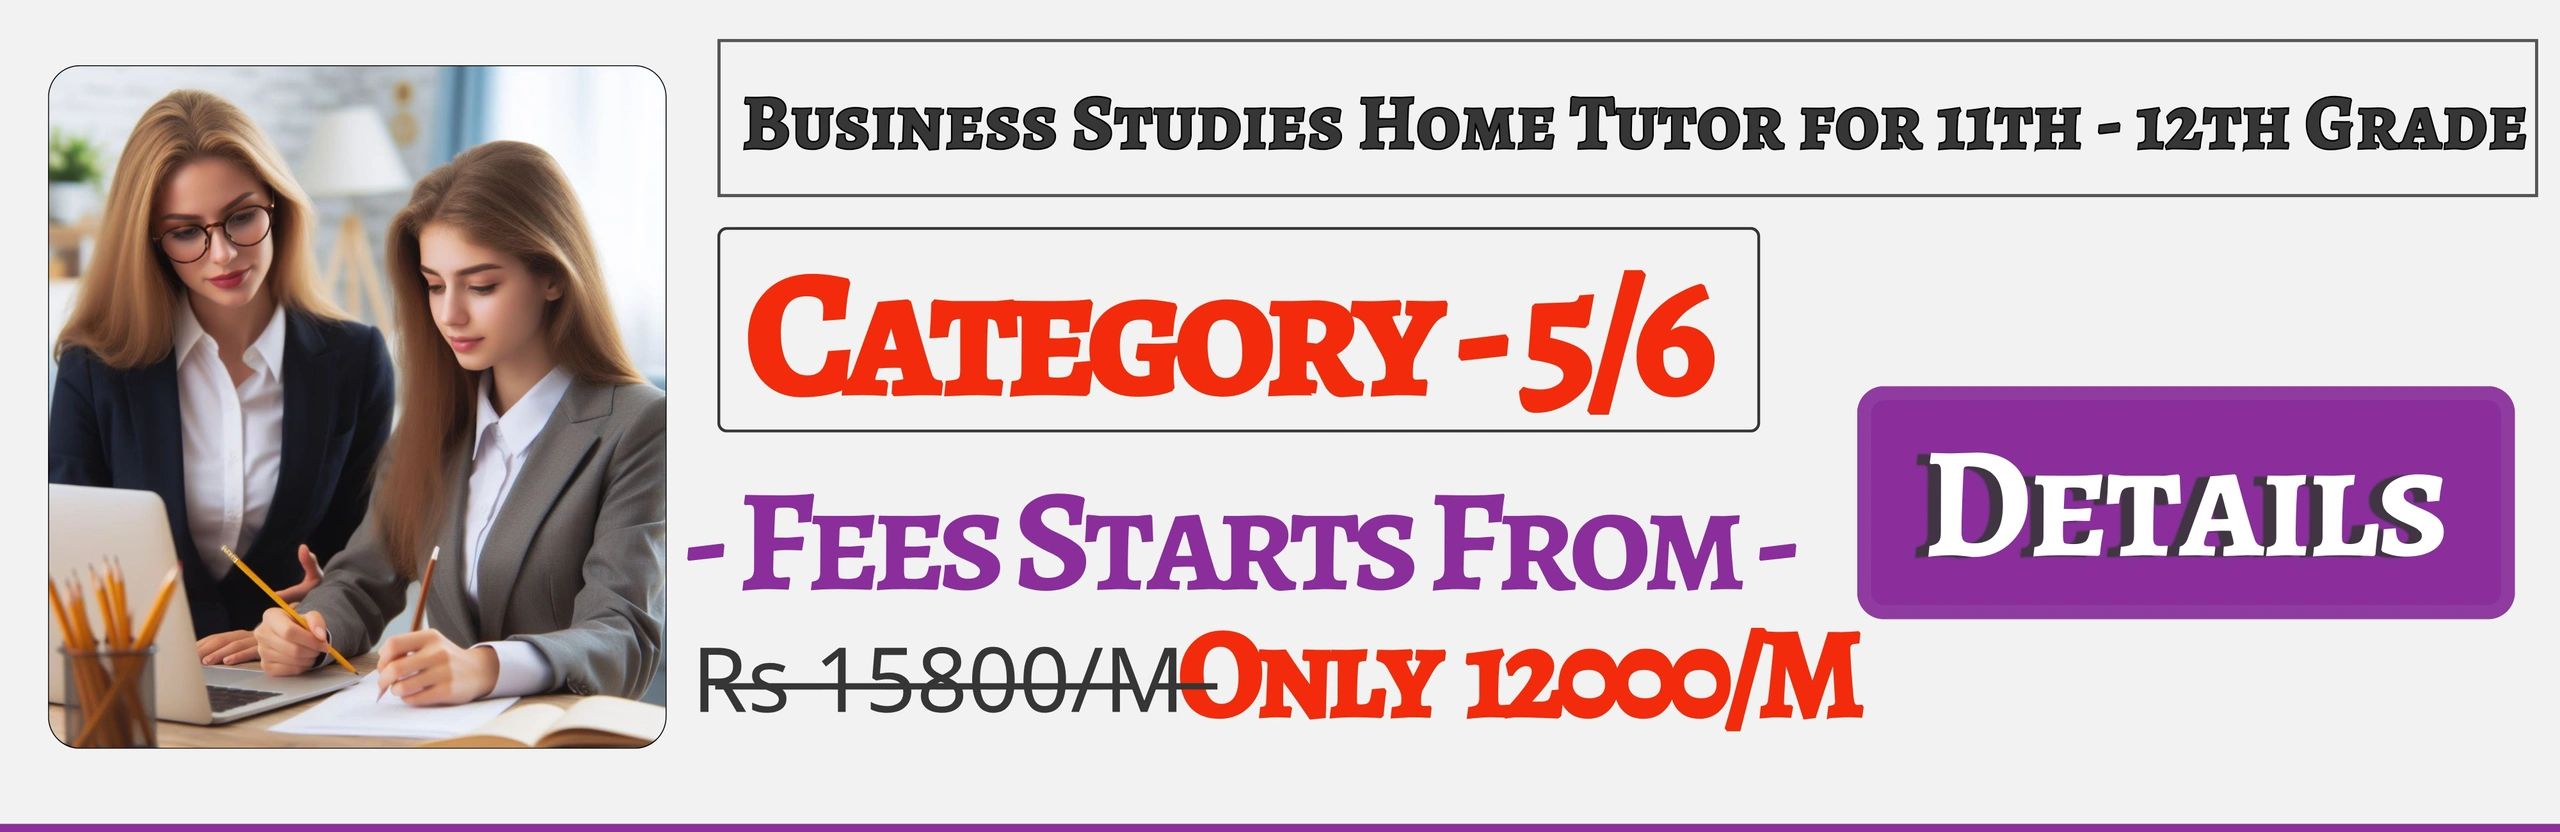 Book Best Nearby Business Studies Home Tuition Tutors For 11th & 12th Jaipur ,Fees Only 12000/M